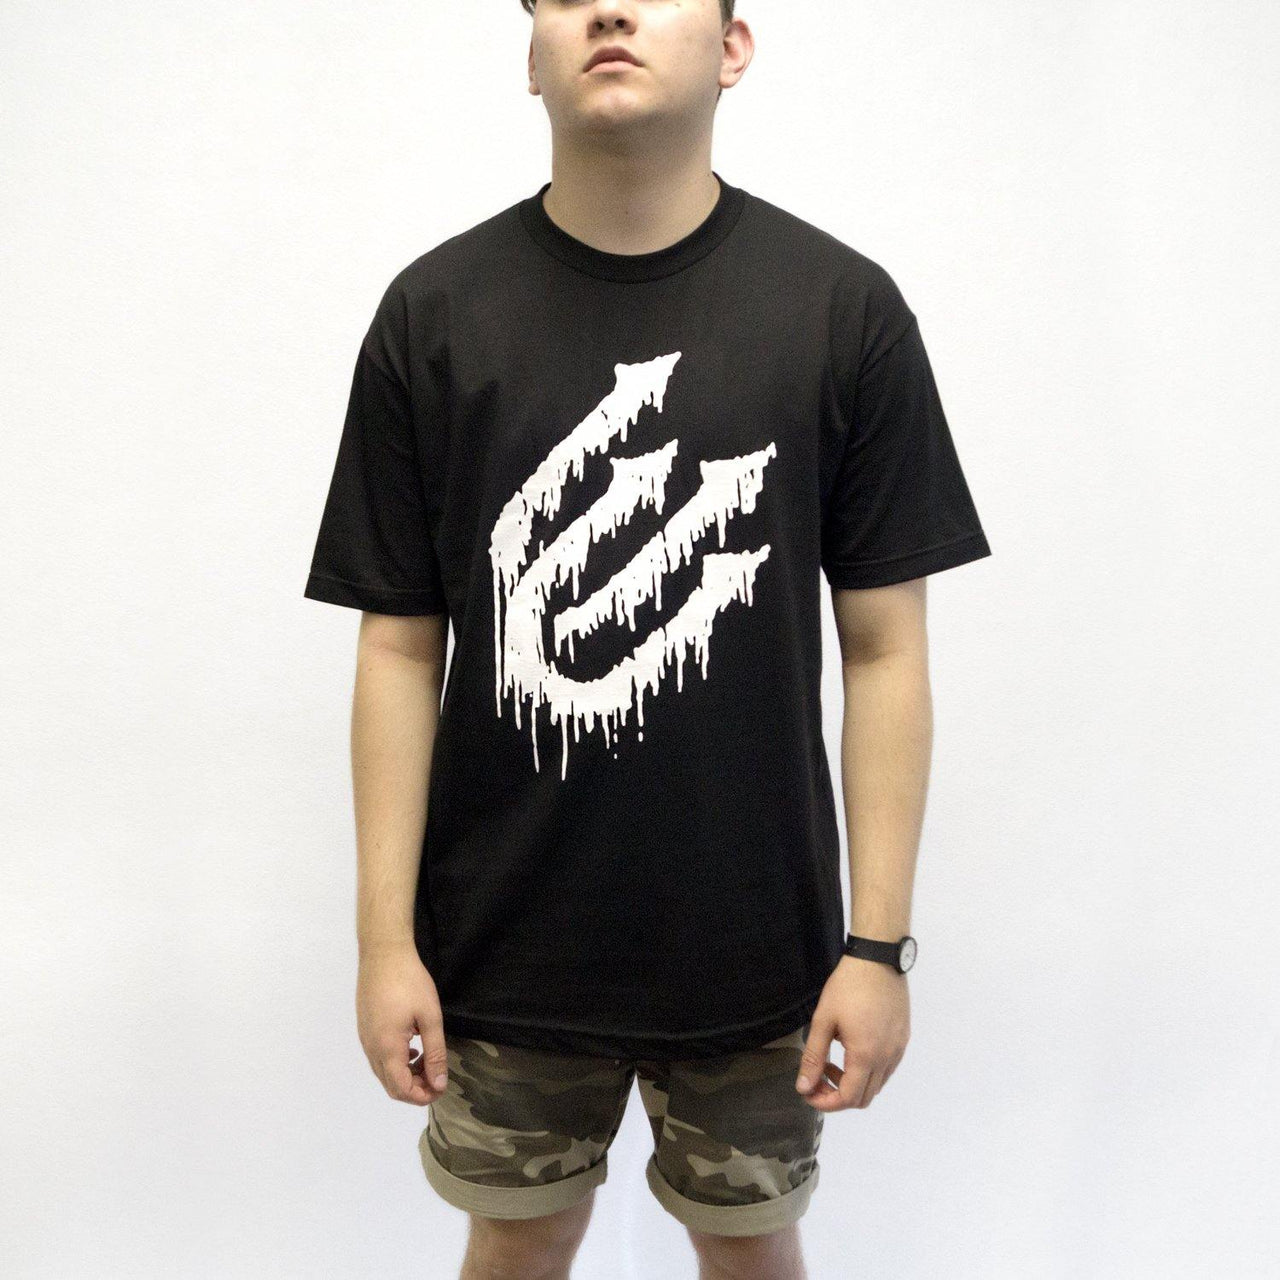 Buy – Cold Cuts Limited "Drippy" Shirt – Band & Music Merch – Cold Cuts Merch